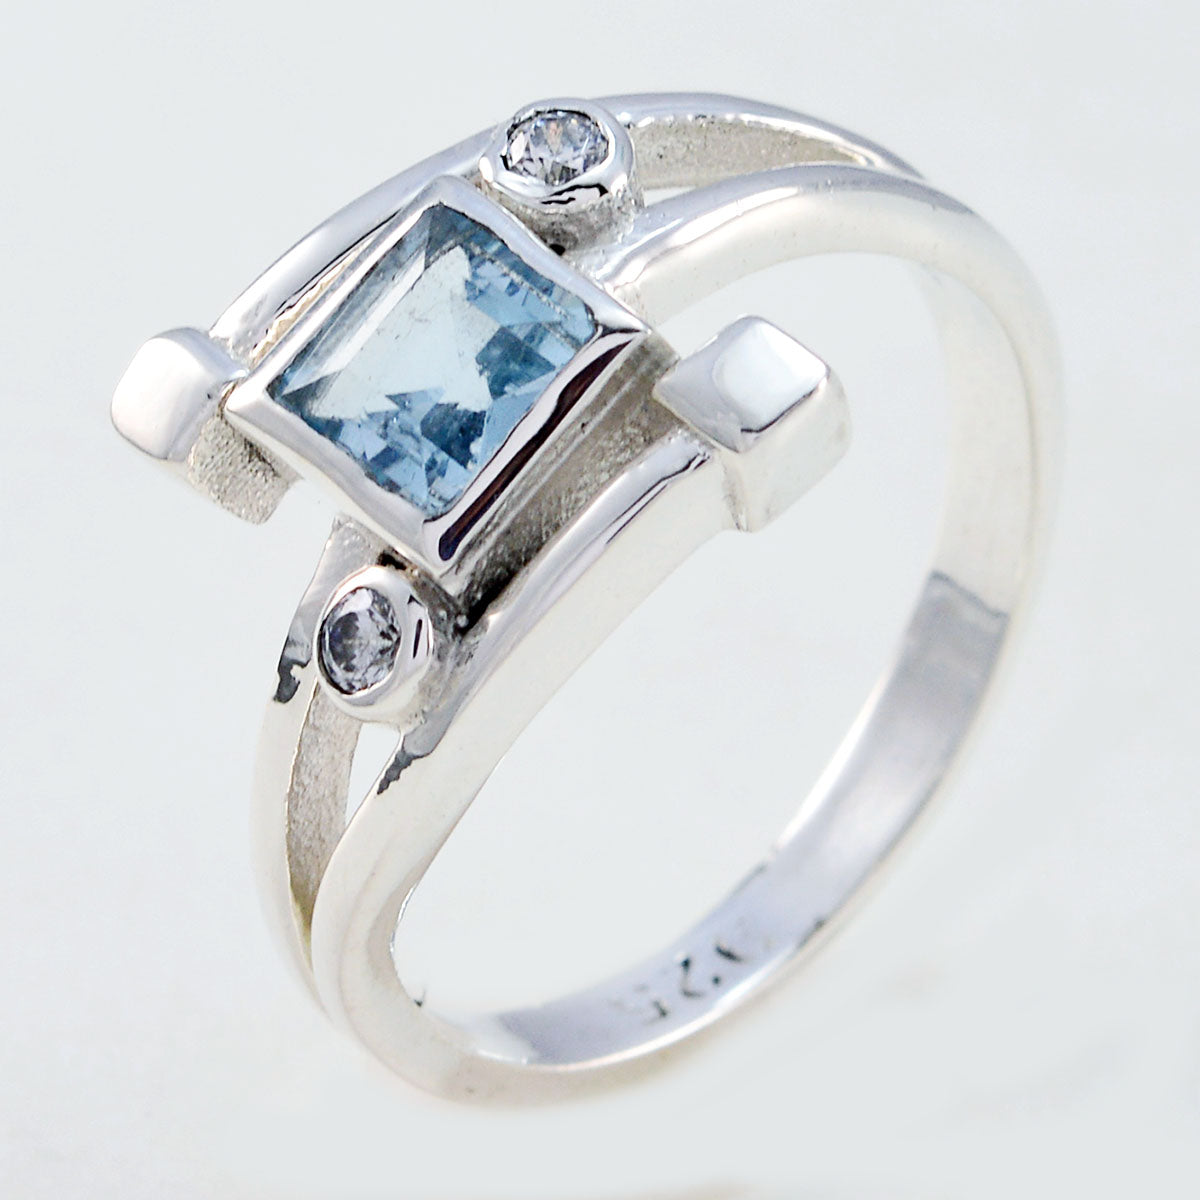 Riyo Excellent Stone Blue Topaz Sterling Silver Ring Ledies Jewelry